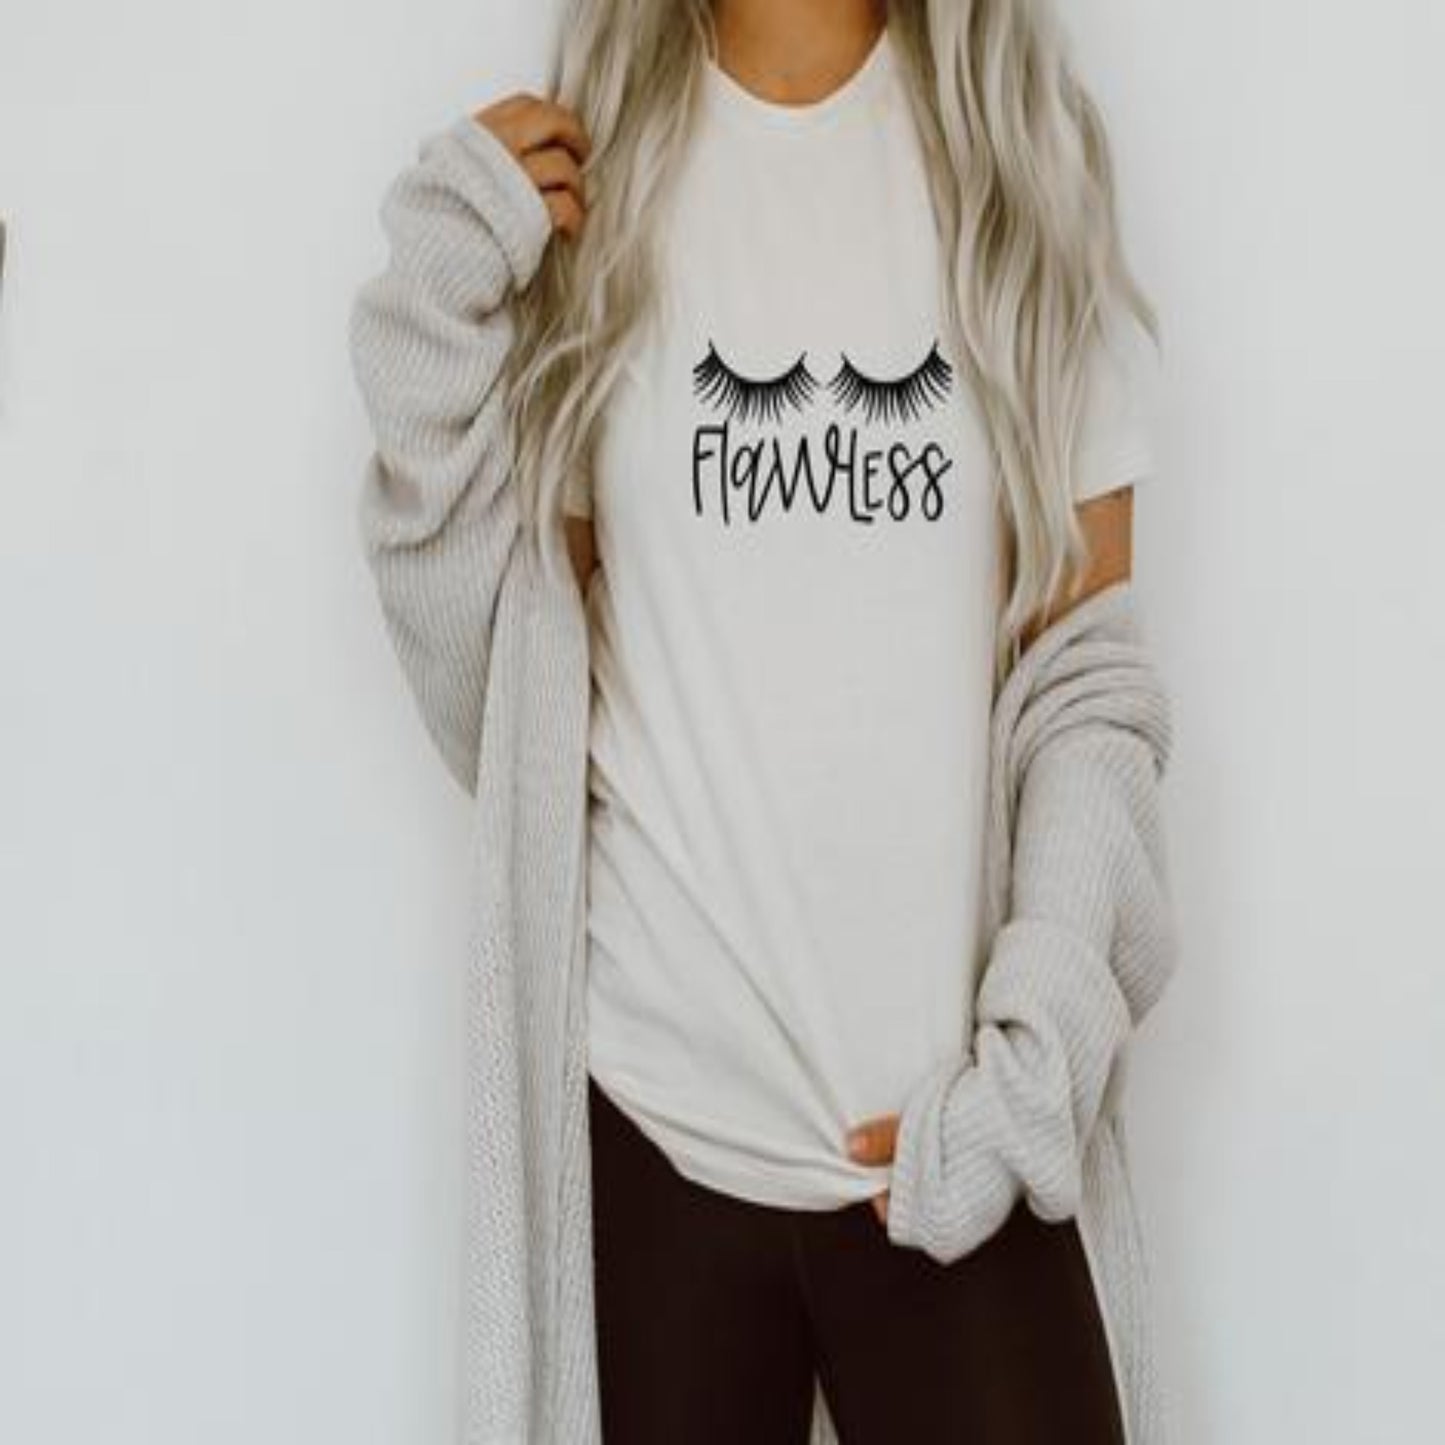 flawless_with_eyelashes specialty tee everyday wear casual shirt comfortable tshirt